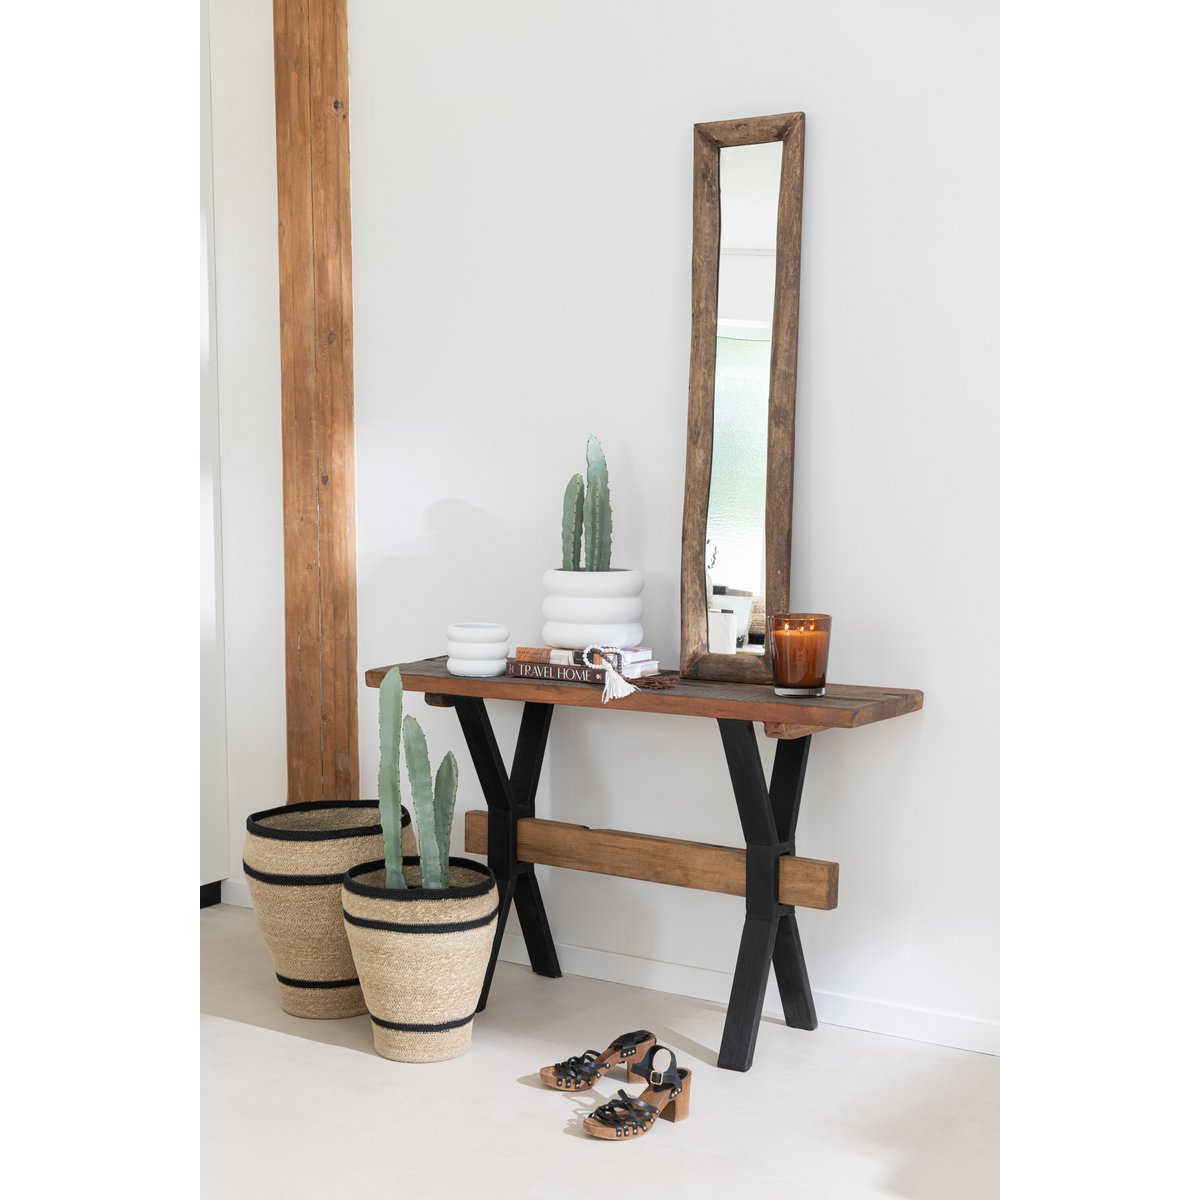 Narrow mirror with wooden frame - wall mirror 120 x 24 cm